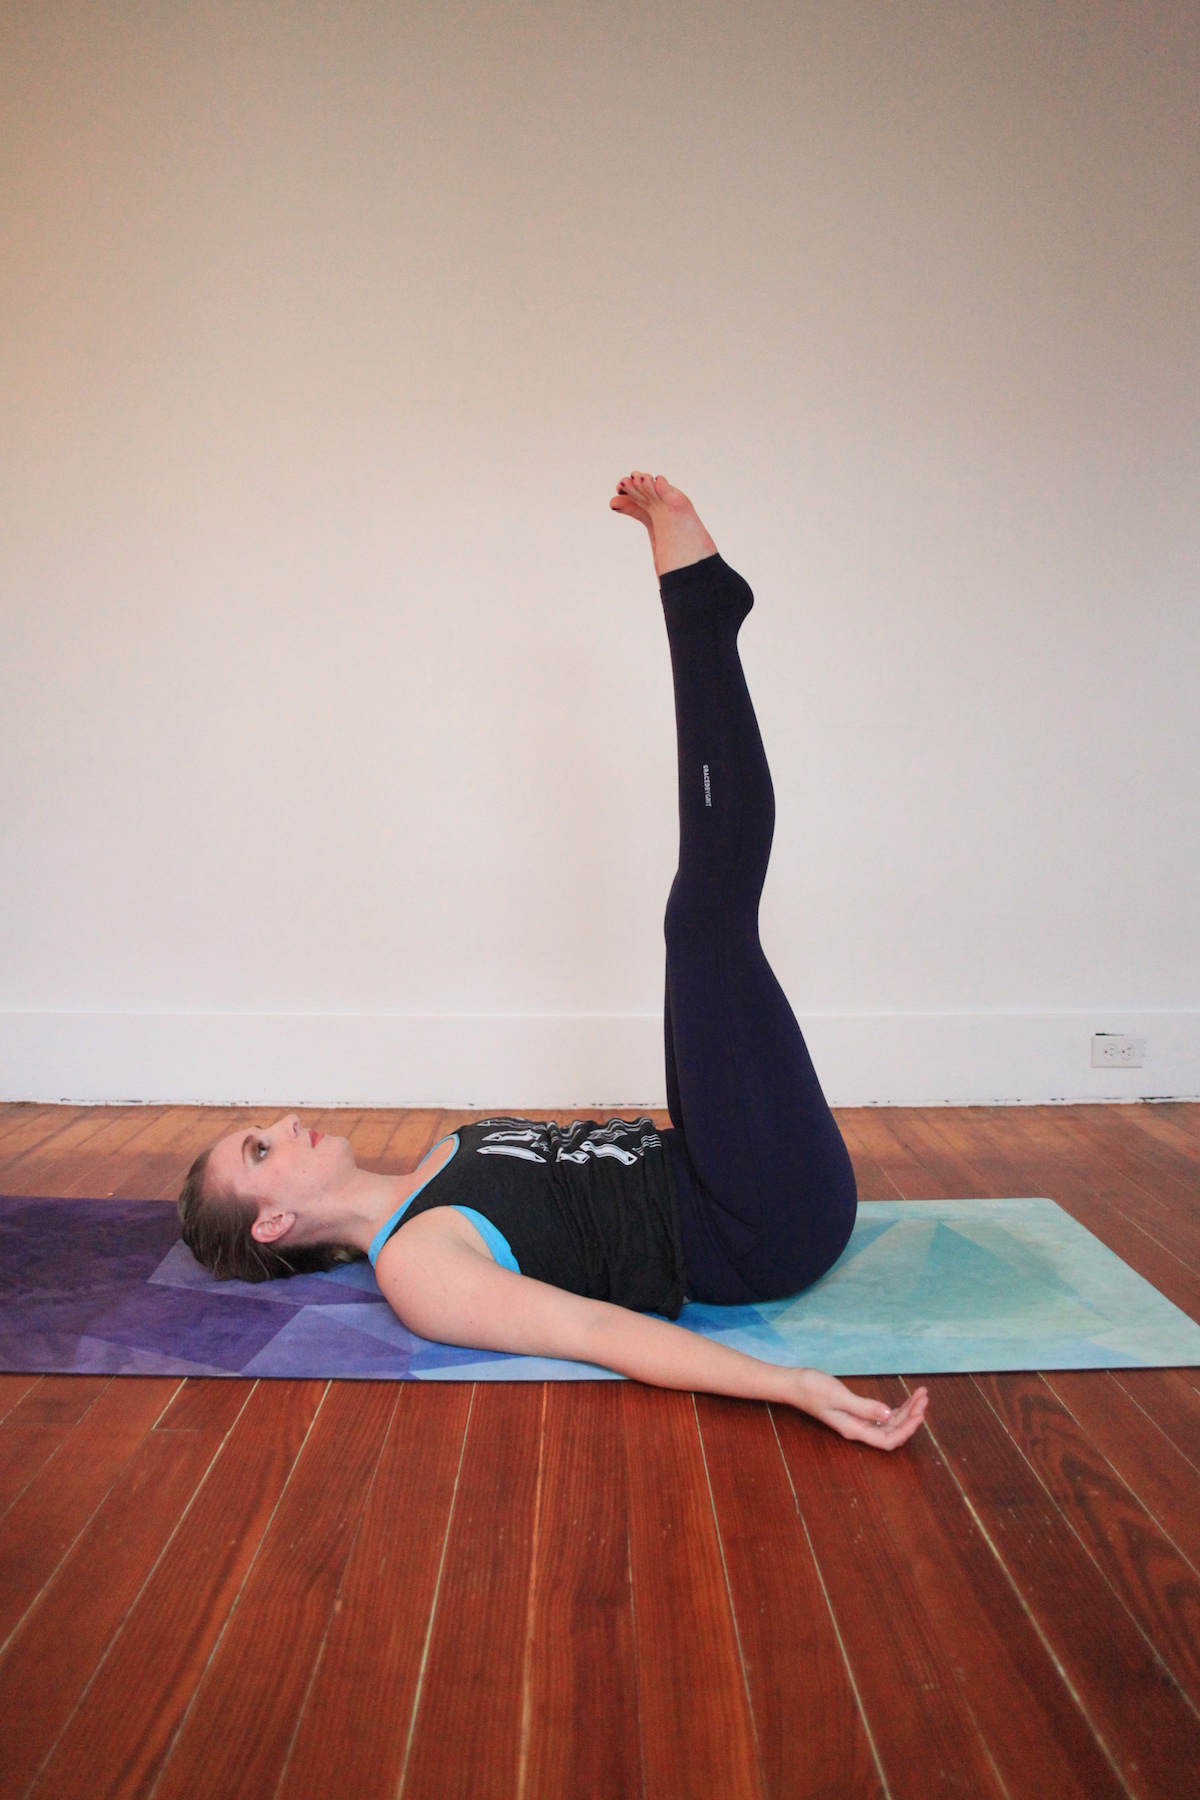 If you've been overworking your Keurig, these simple yoga poses will help to boost your energy!